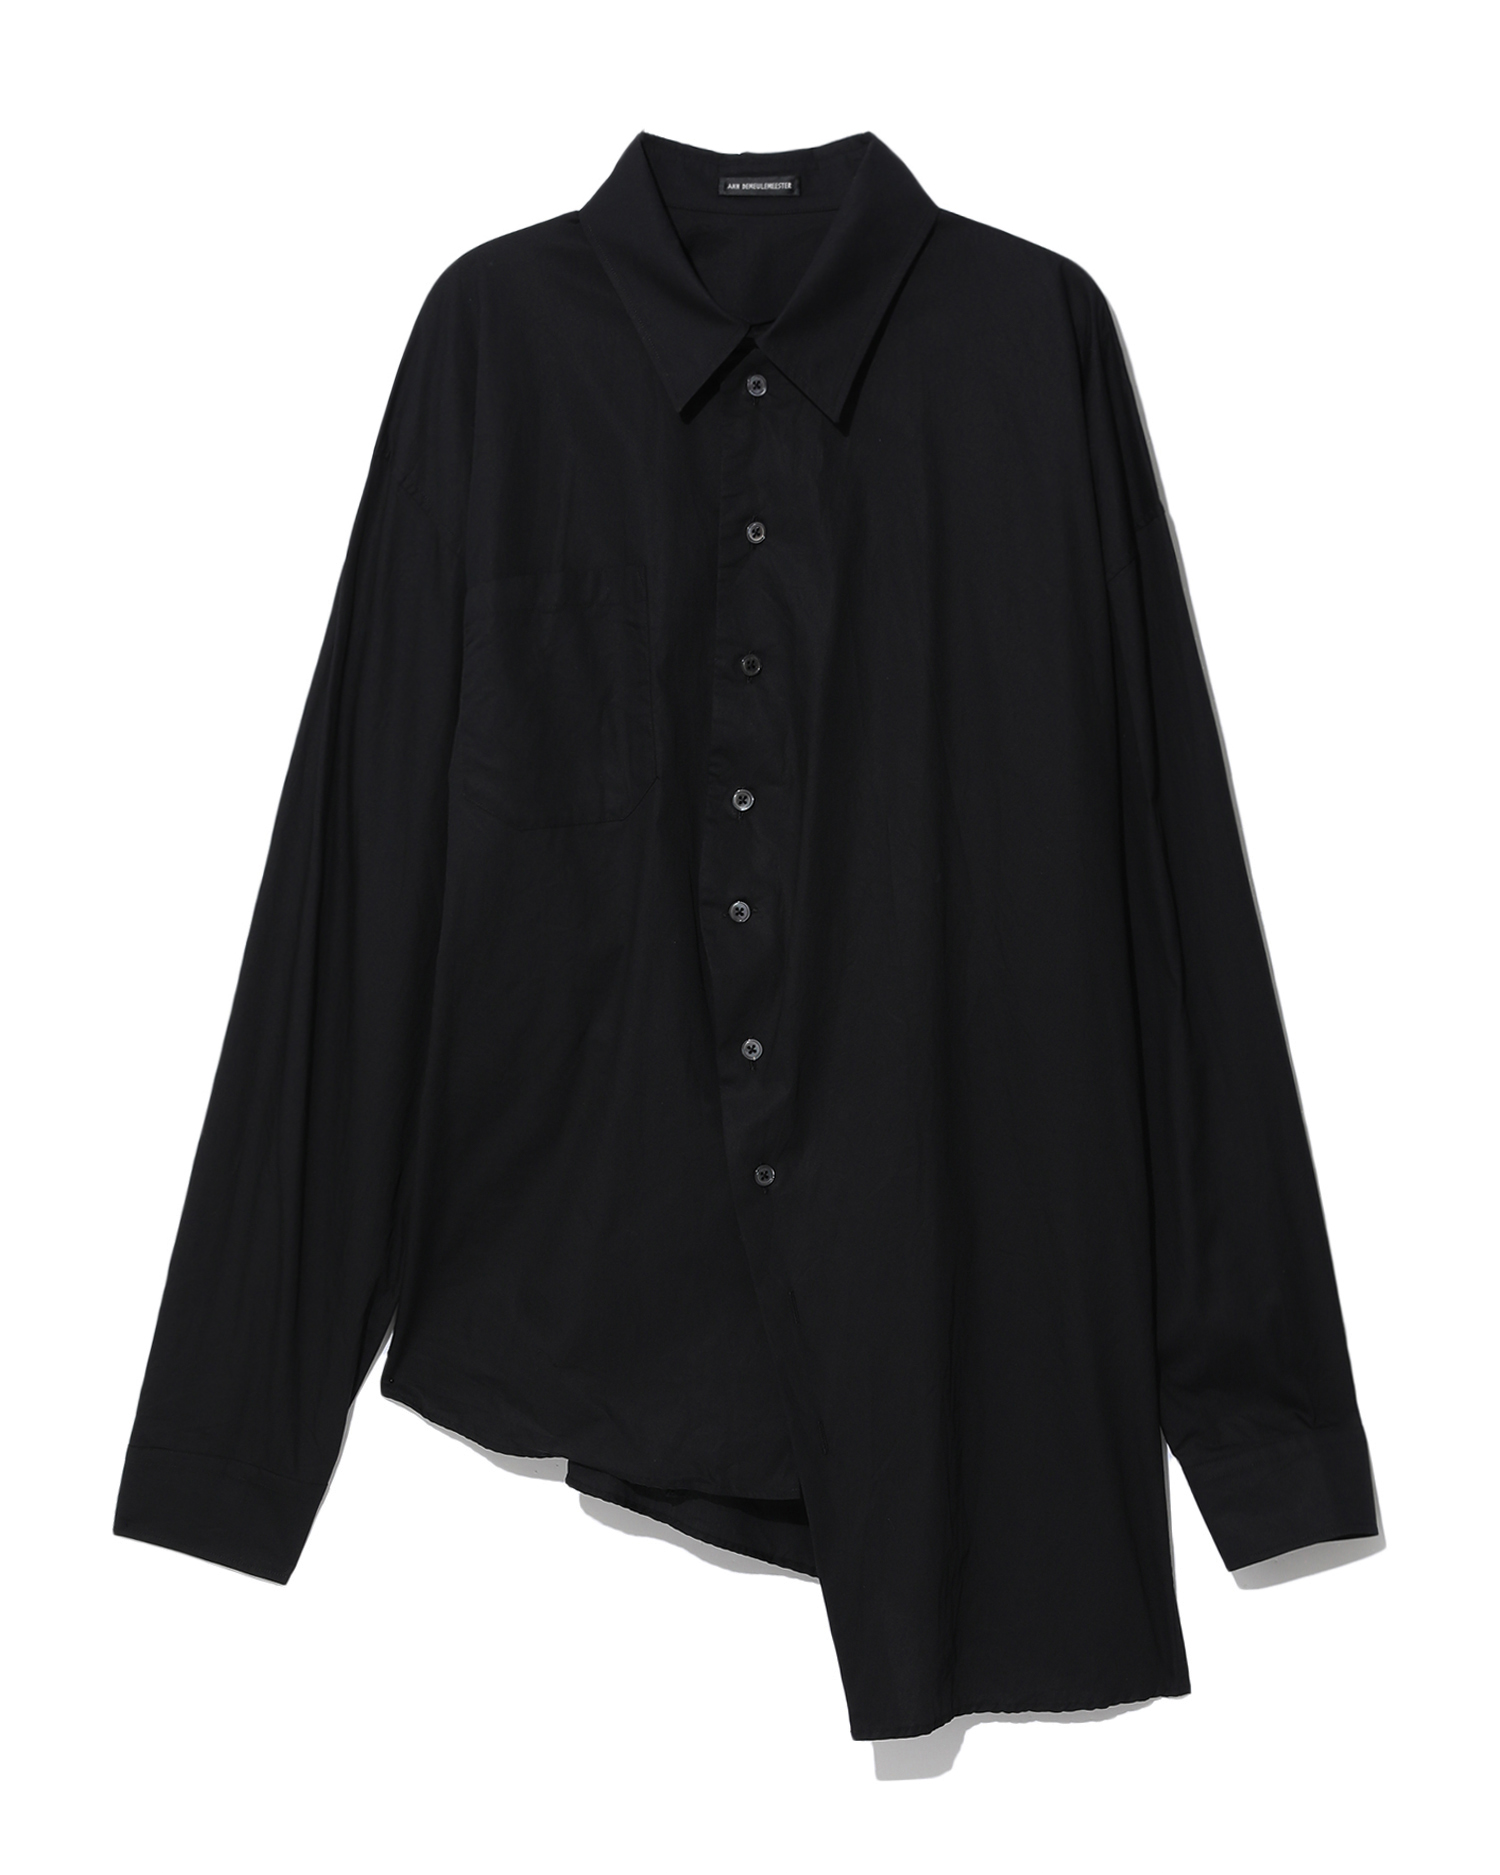 Ann Demeulemeester Nelly dropped shoulder shirt| ITeSHOP